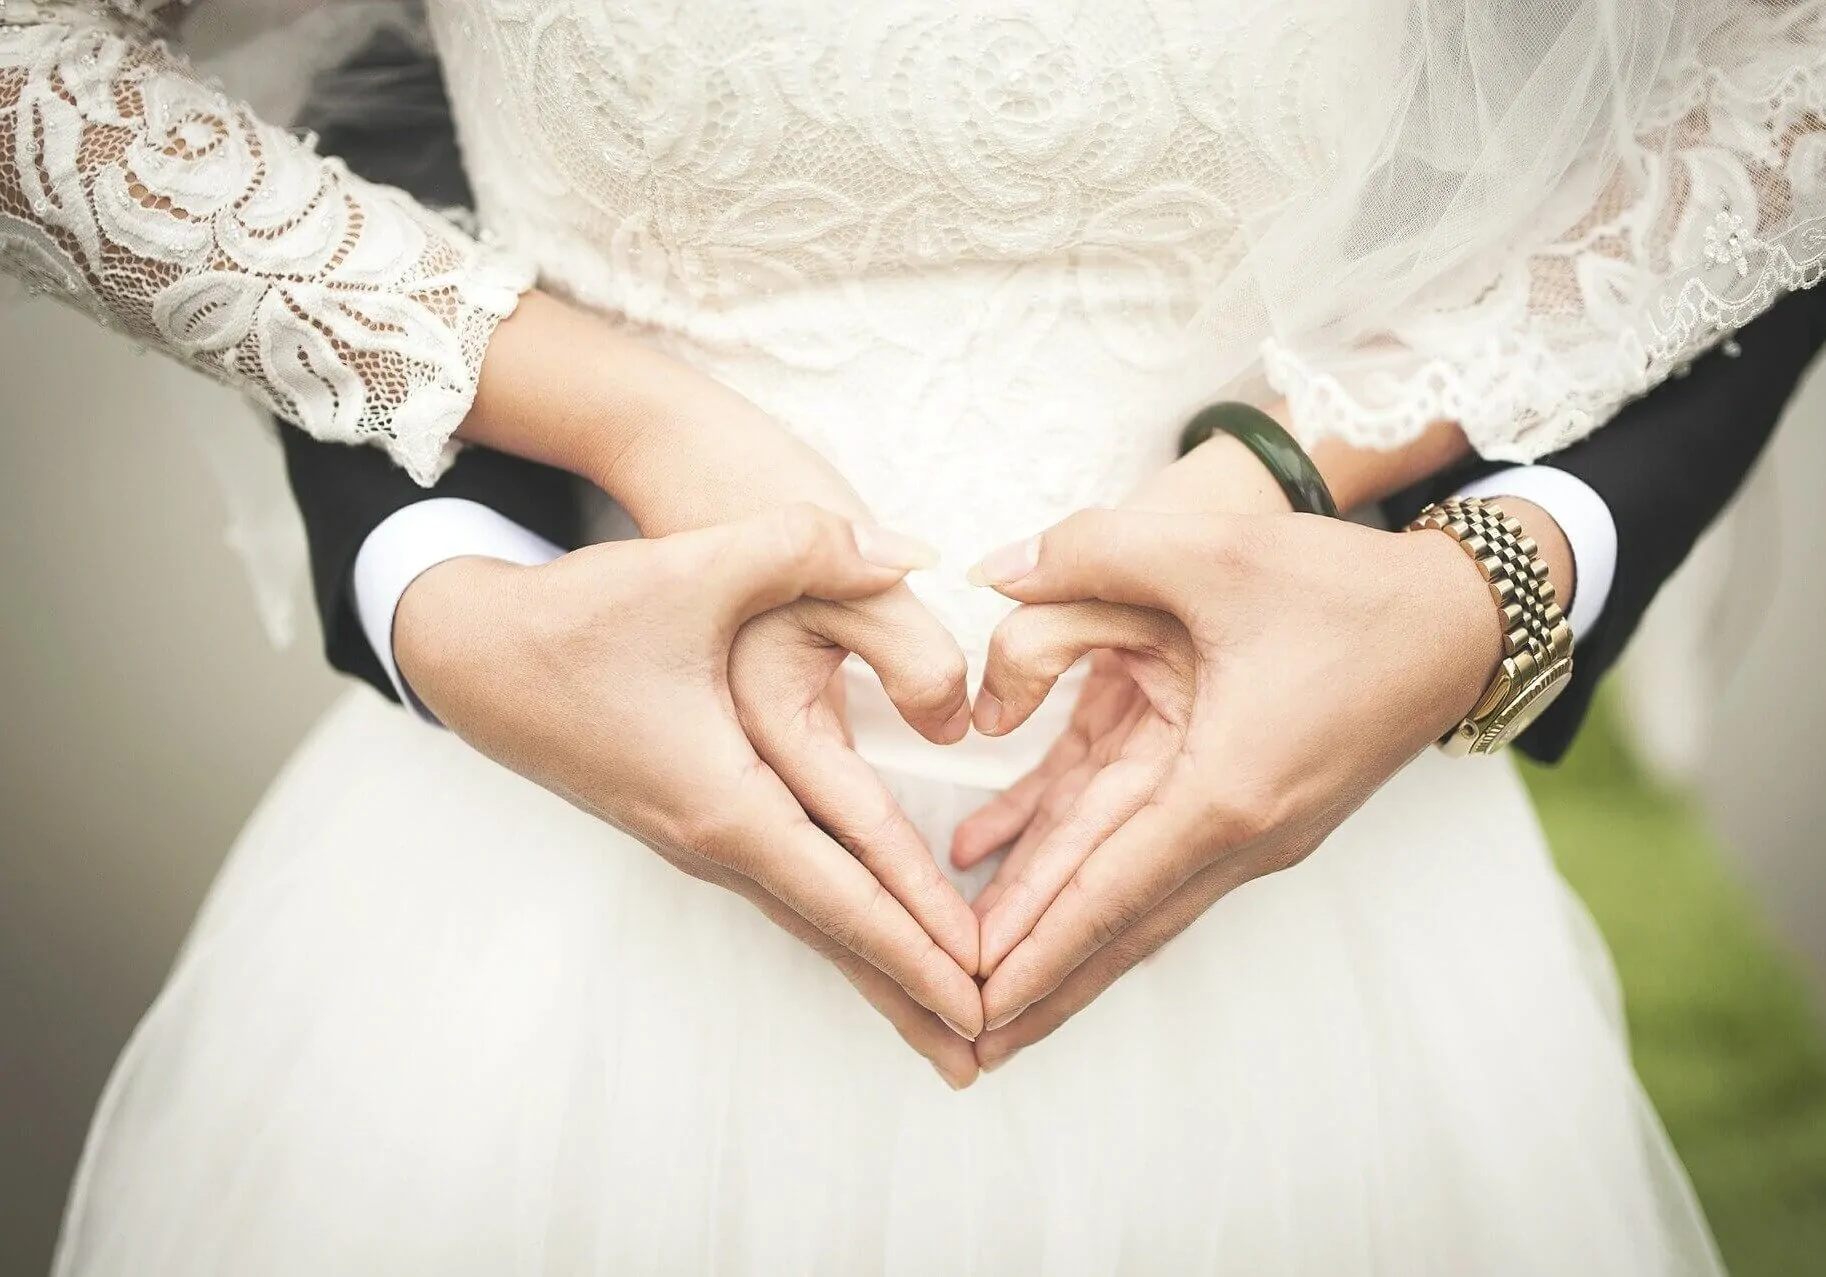 A man and woman at a wedding with hands held in a heart shape